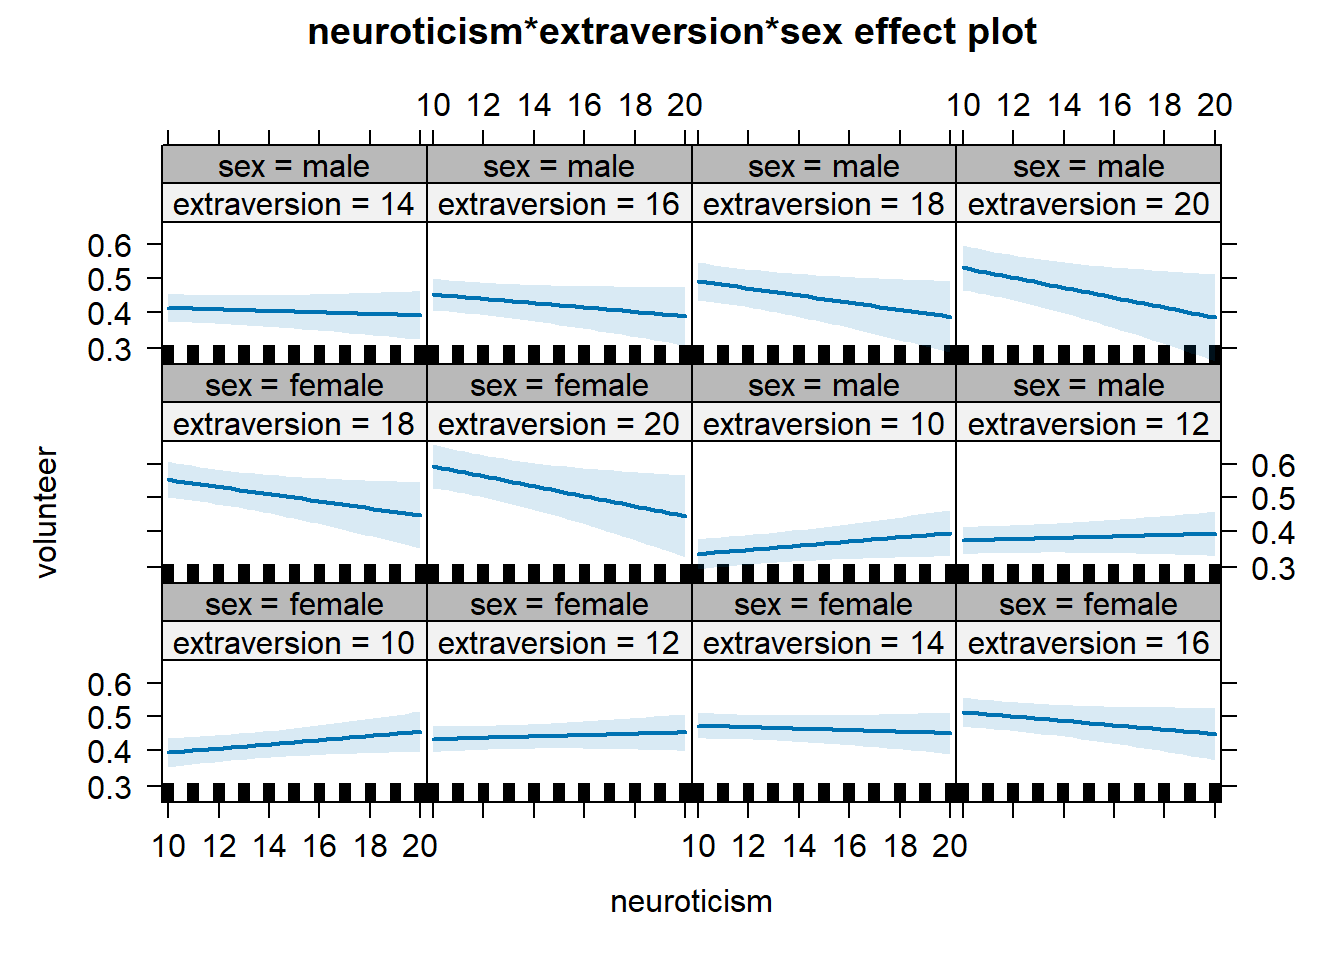 Effect plot showing predicted probability for volunteering over the range of plausible neuroticism values conditioned on 12 different combinations of sex and extraversion.